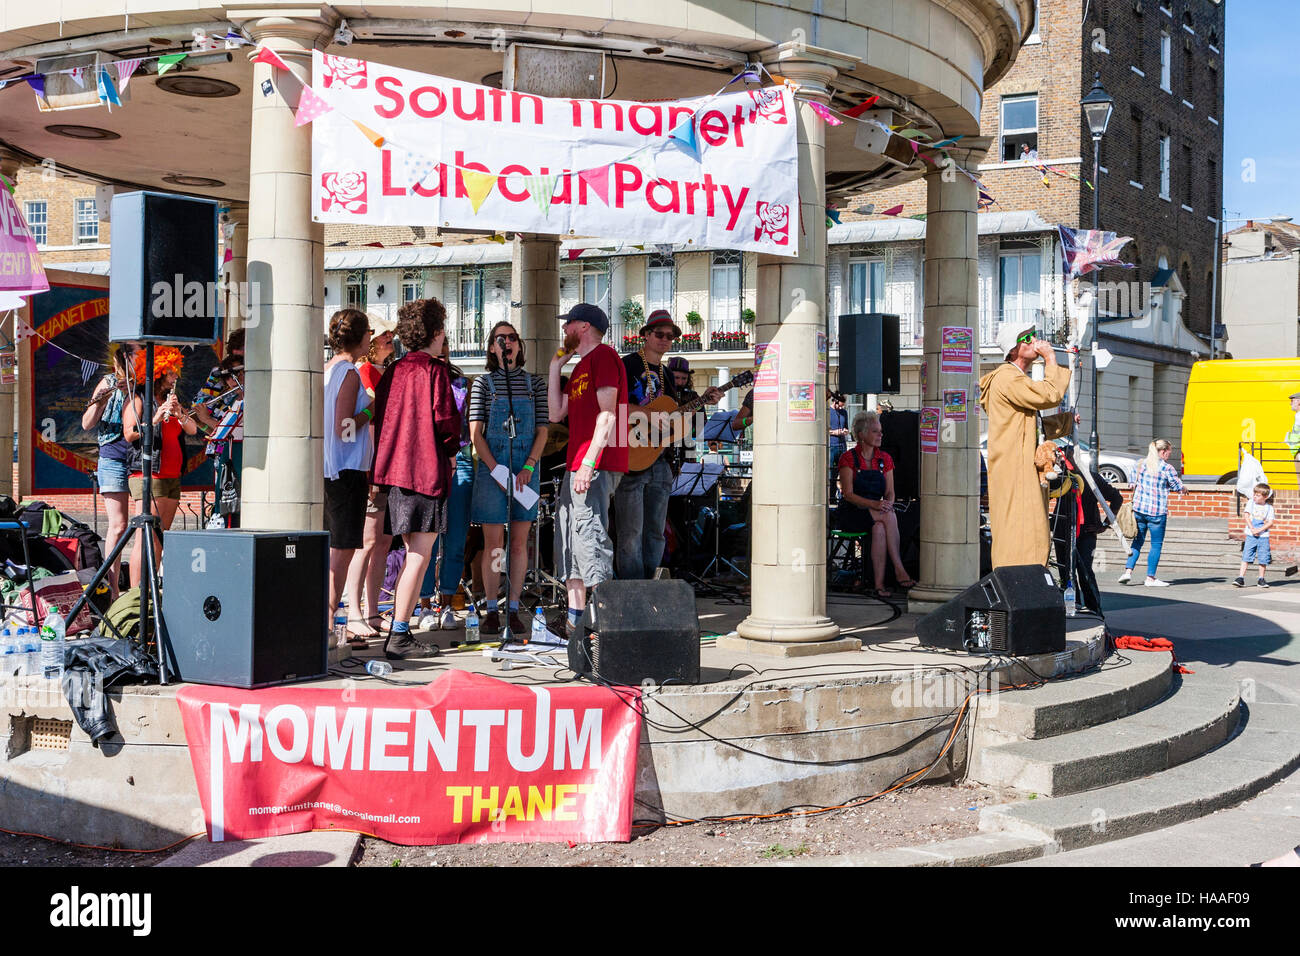 England, Ramsgate. Jeremy Corbyn Momentum rally. Male singer perfomes outdoors on bandstand with backing singers and group. Political banners. Stock Photo